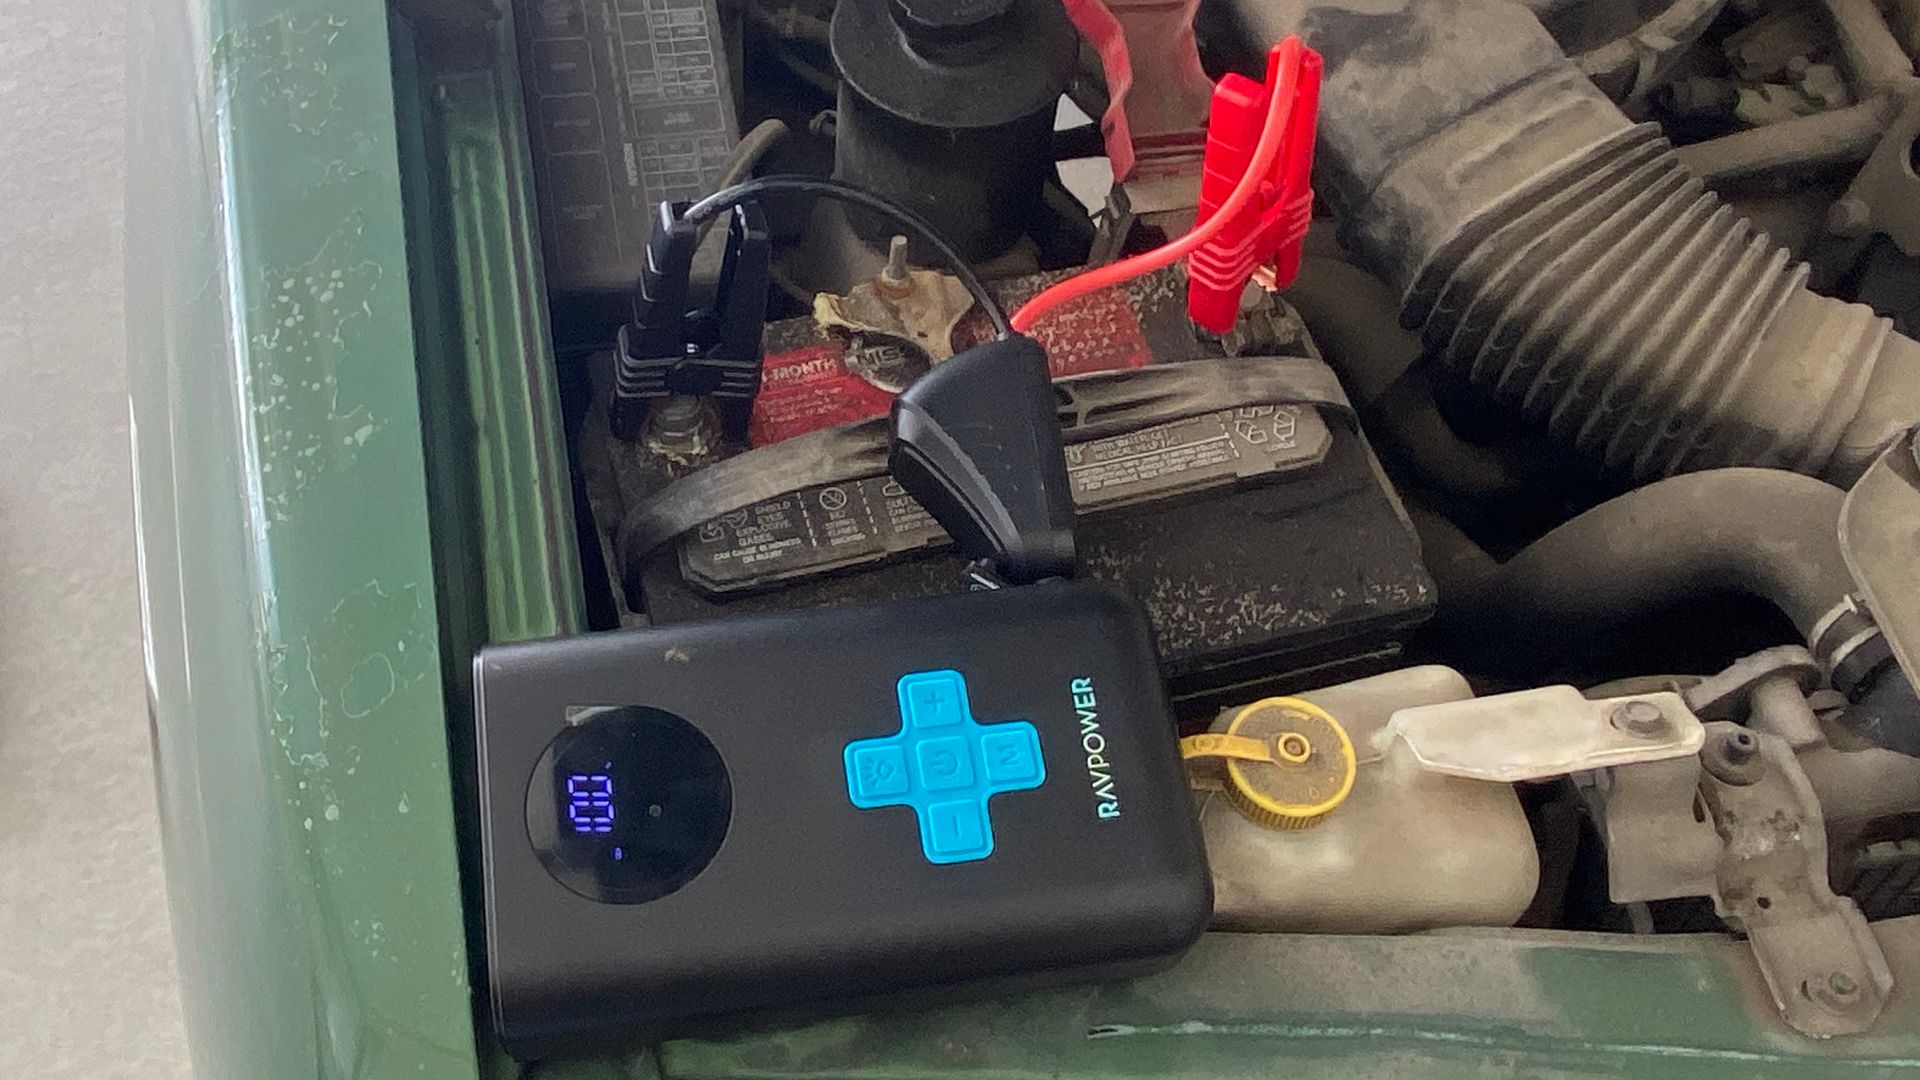 The RAVPower Jump Starter With Air Compressor hooked up to an old truck battery.